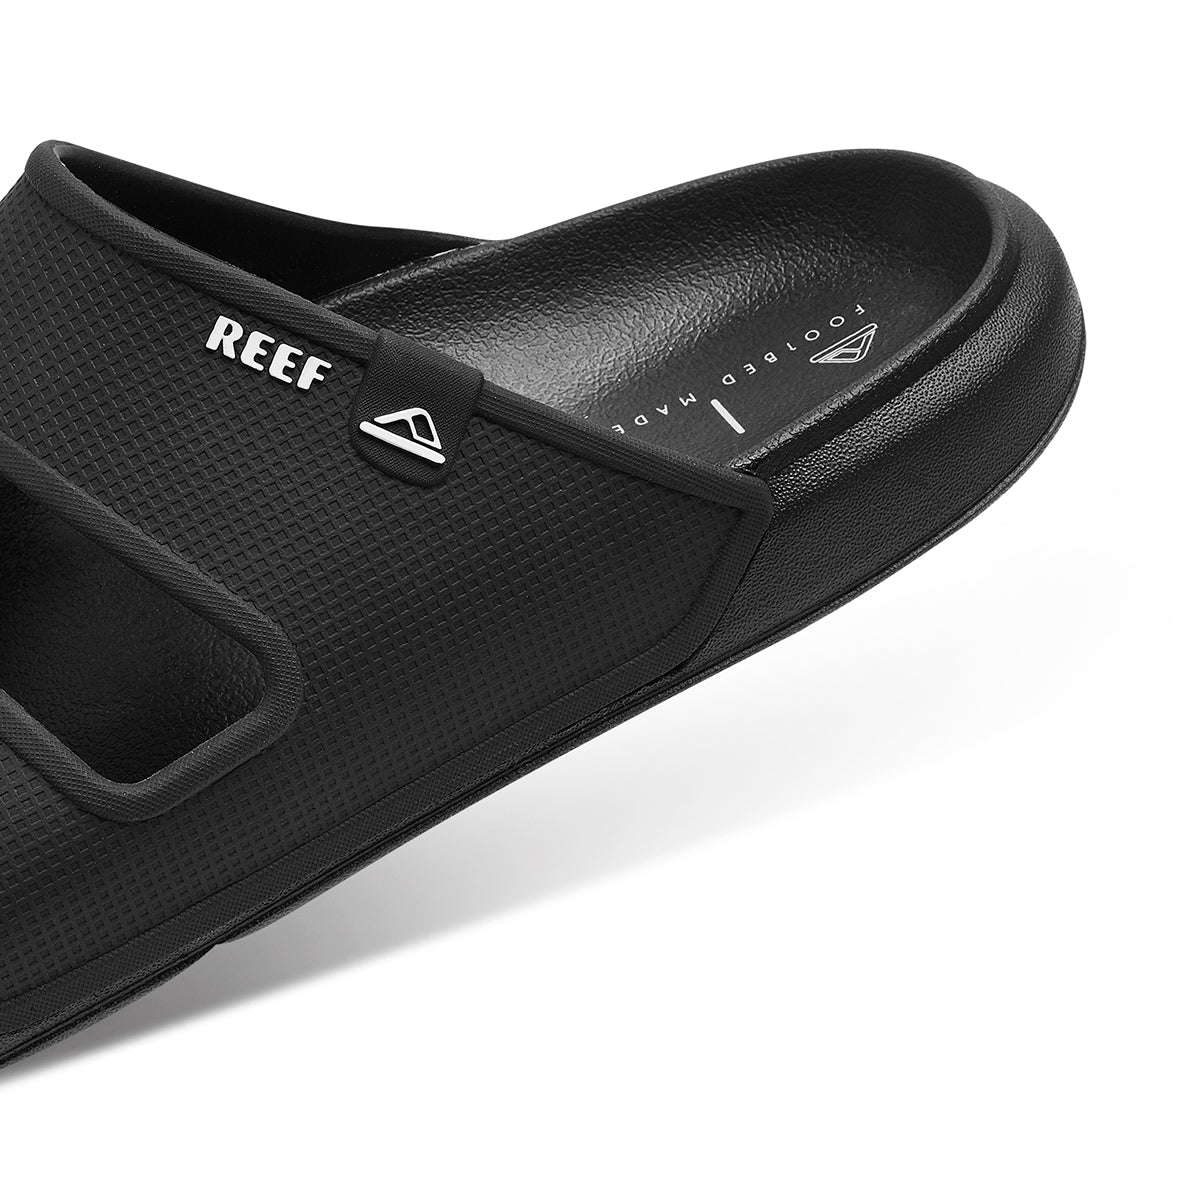 Reef Mens Oasis Double Up